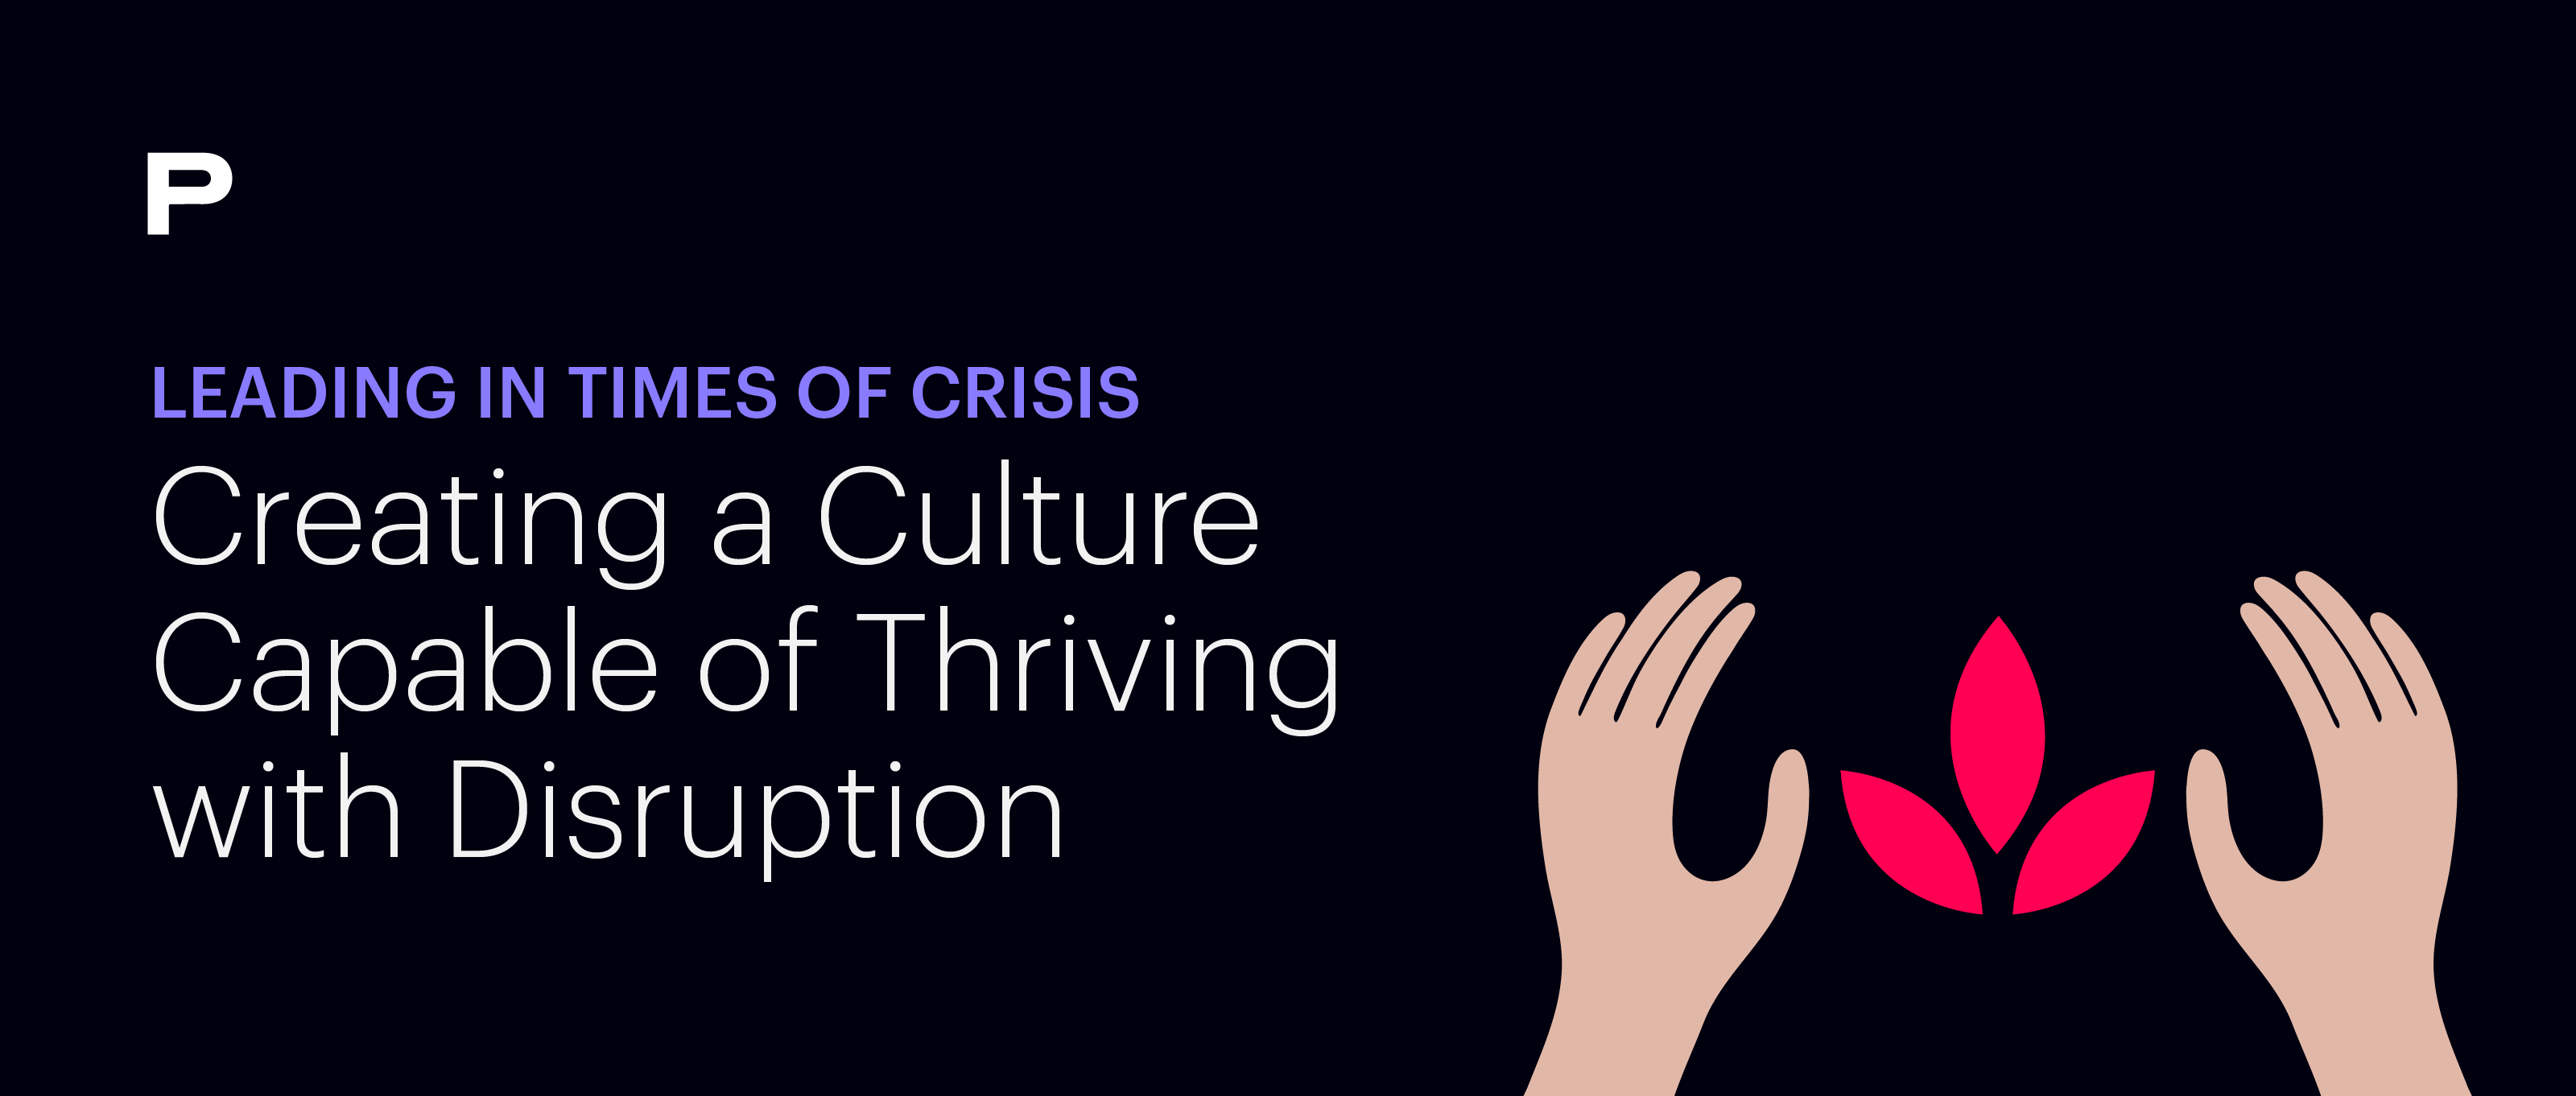 Leading in Times of Crisis: Creating a Culture Capable of Thriving with Disruption